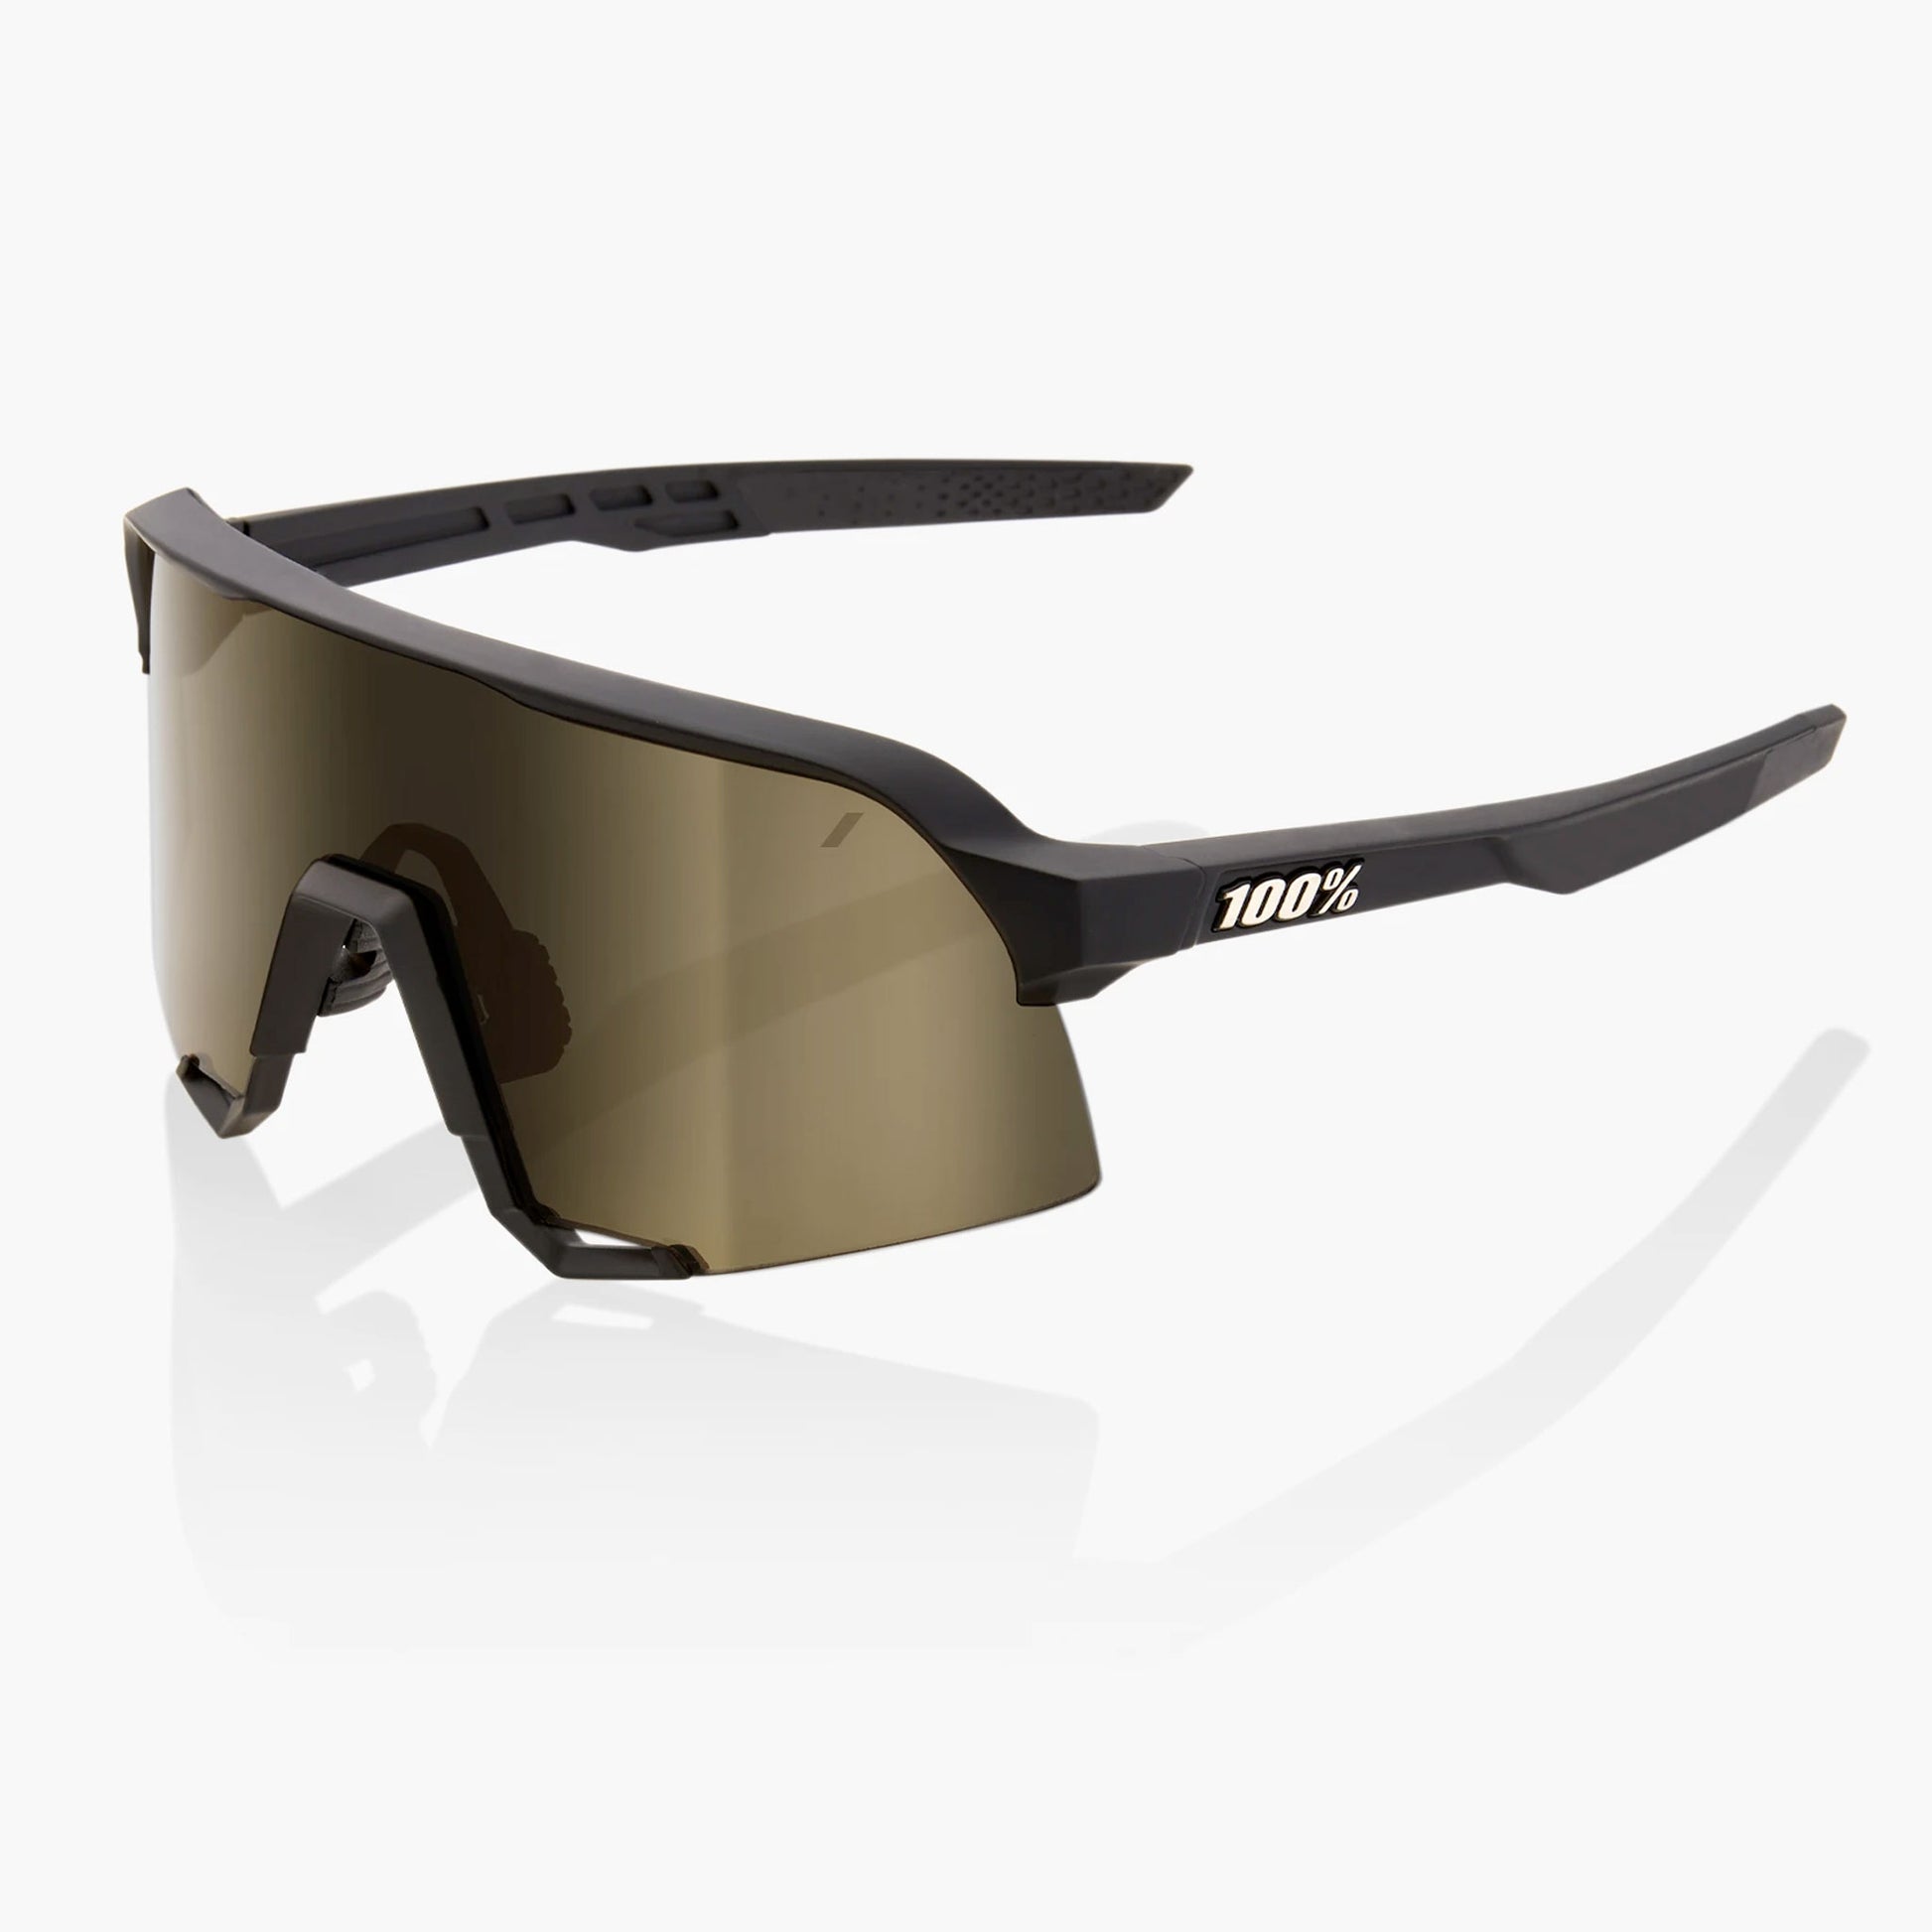 100% S3 Cycling Sunglasses - Soft Tact Black with Soft Gold Mirror Lens buy now at Woolys Wheels Sydney